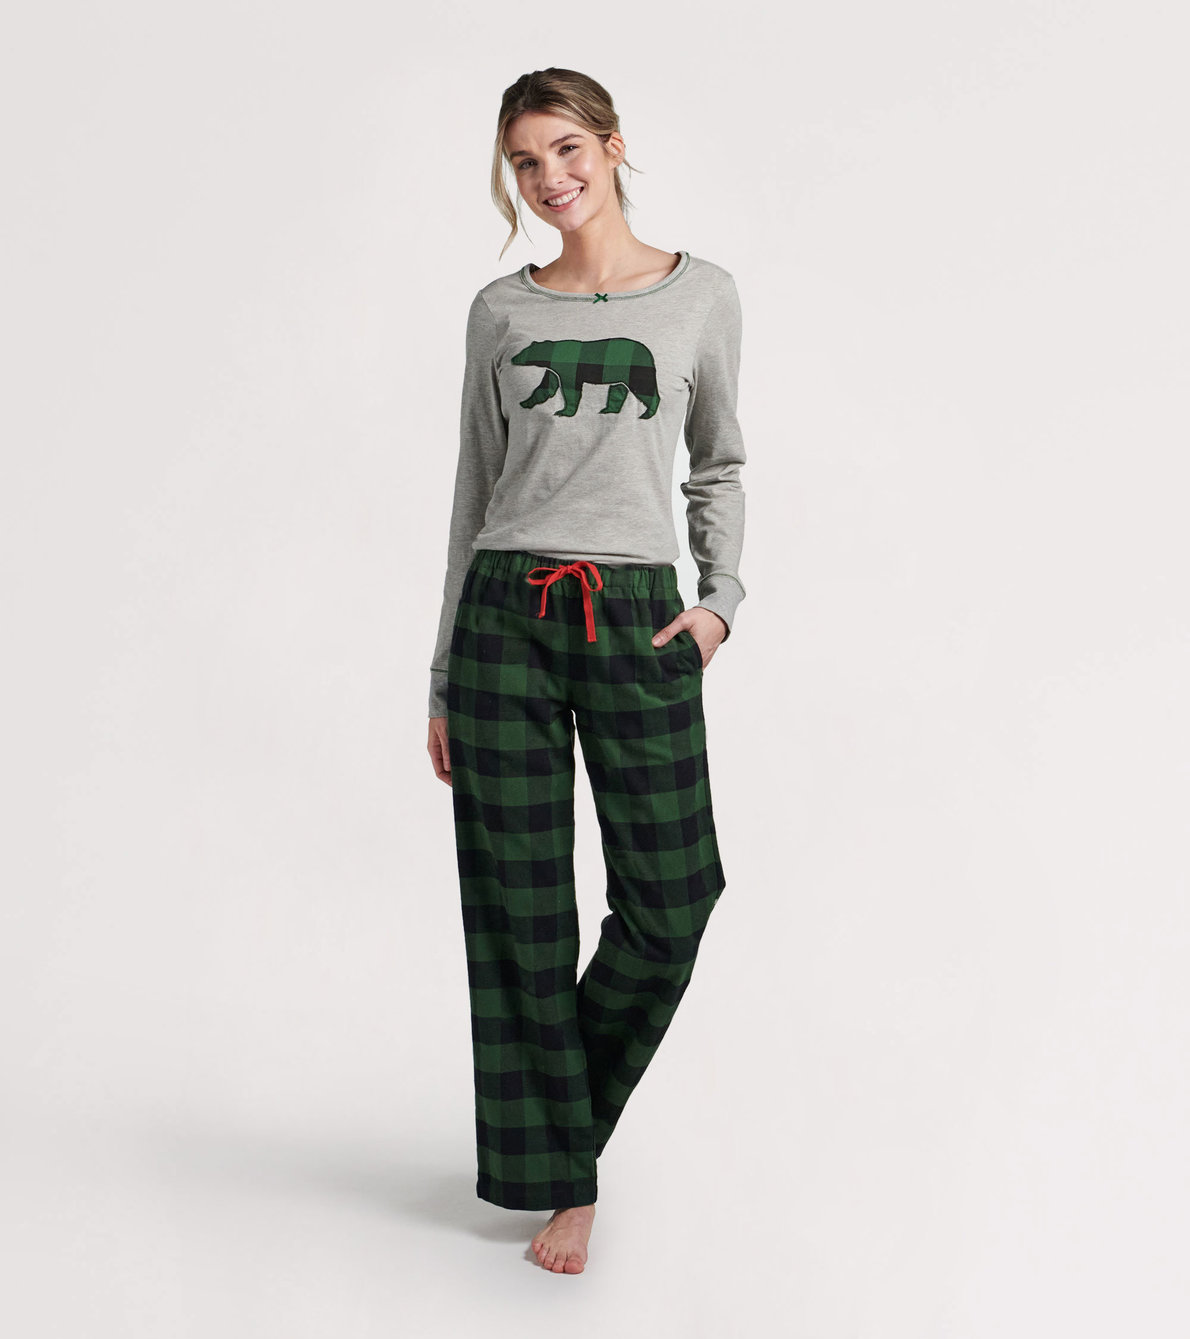 View larger image of Forest Green Plaid Women's Flannel Pajama Pants